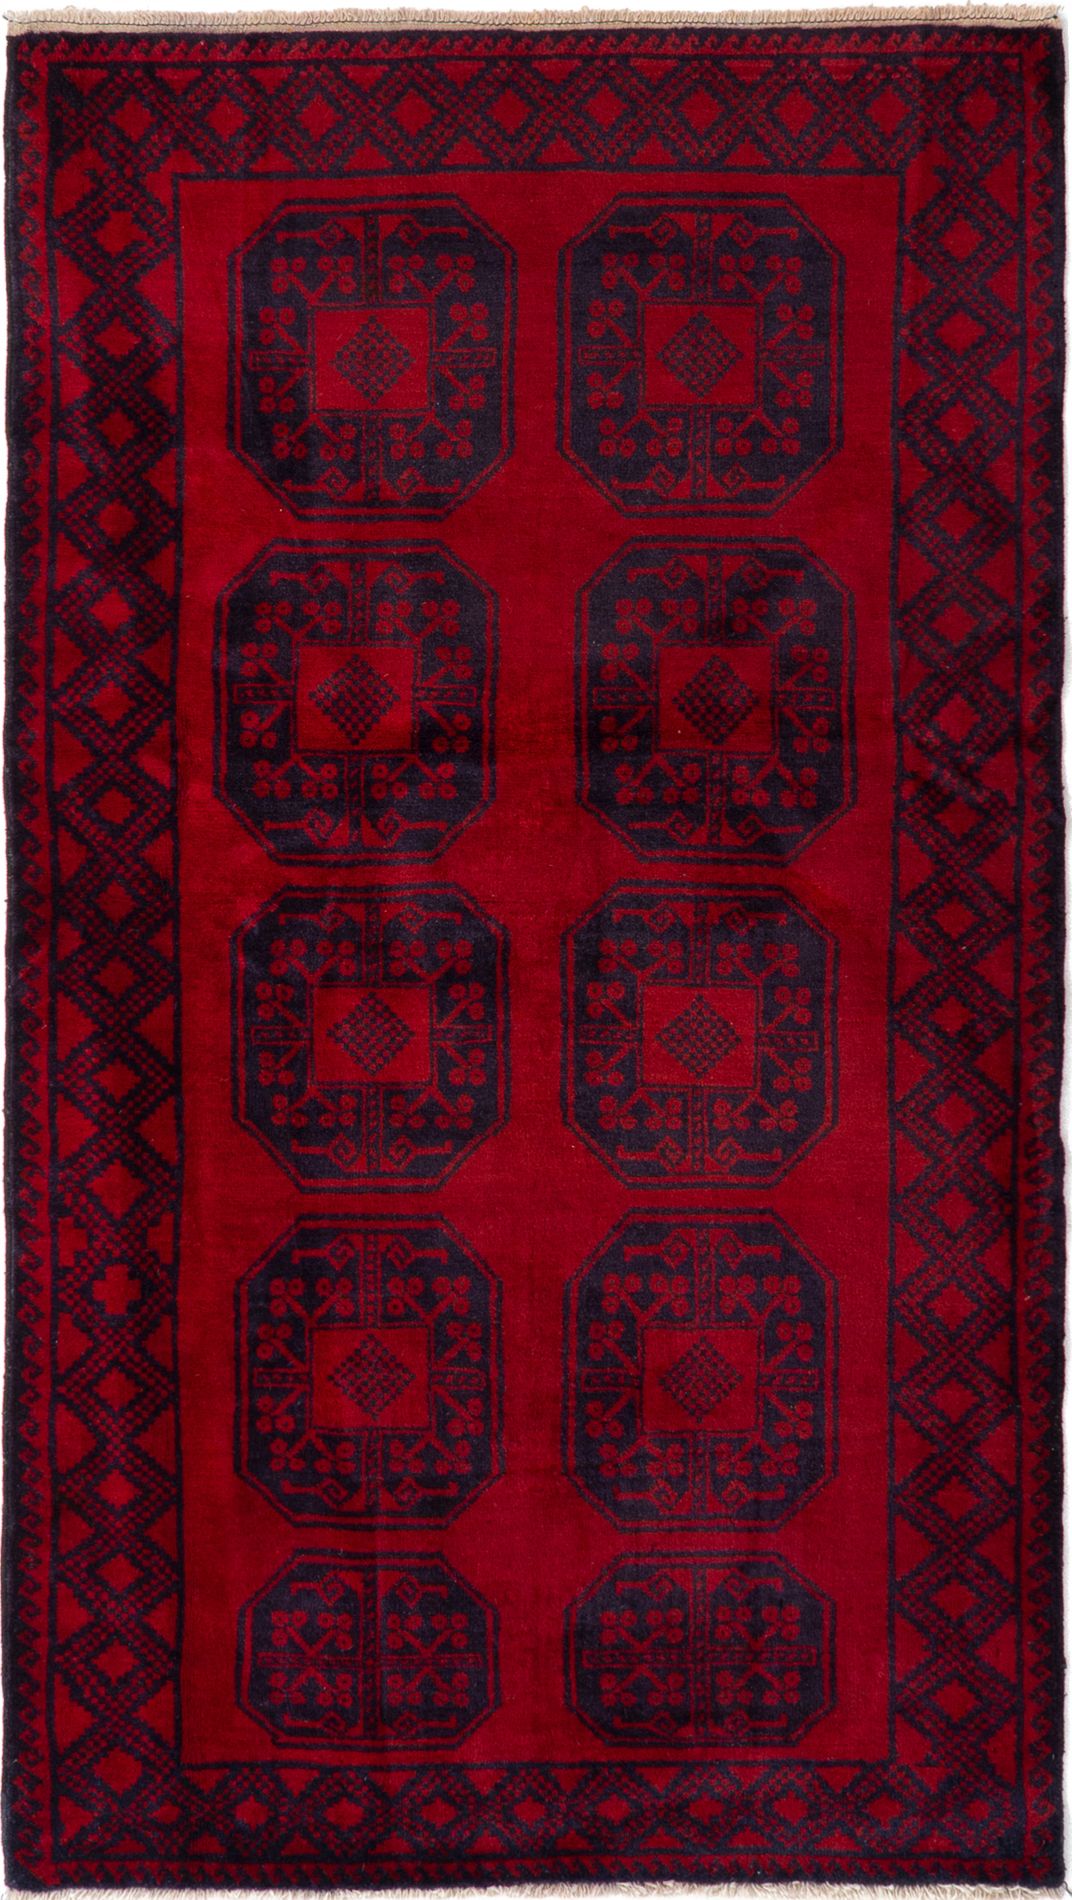 Hand-knotted Teimani Red Wool Rug 3'9" x 6'8" Size: 3'9" x 6'8"  